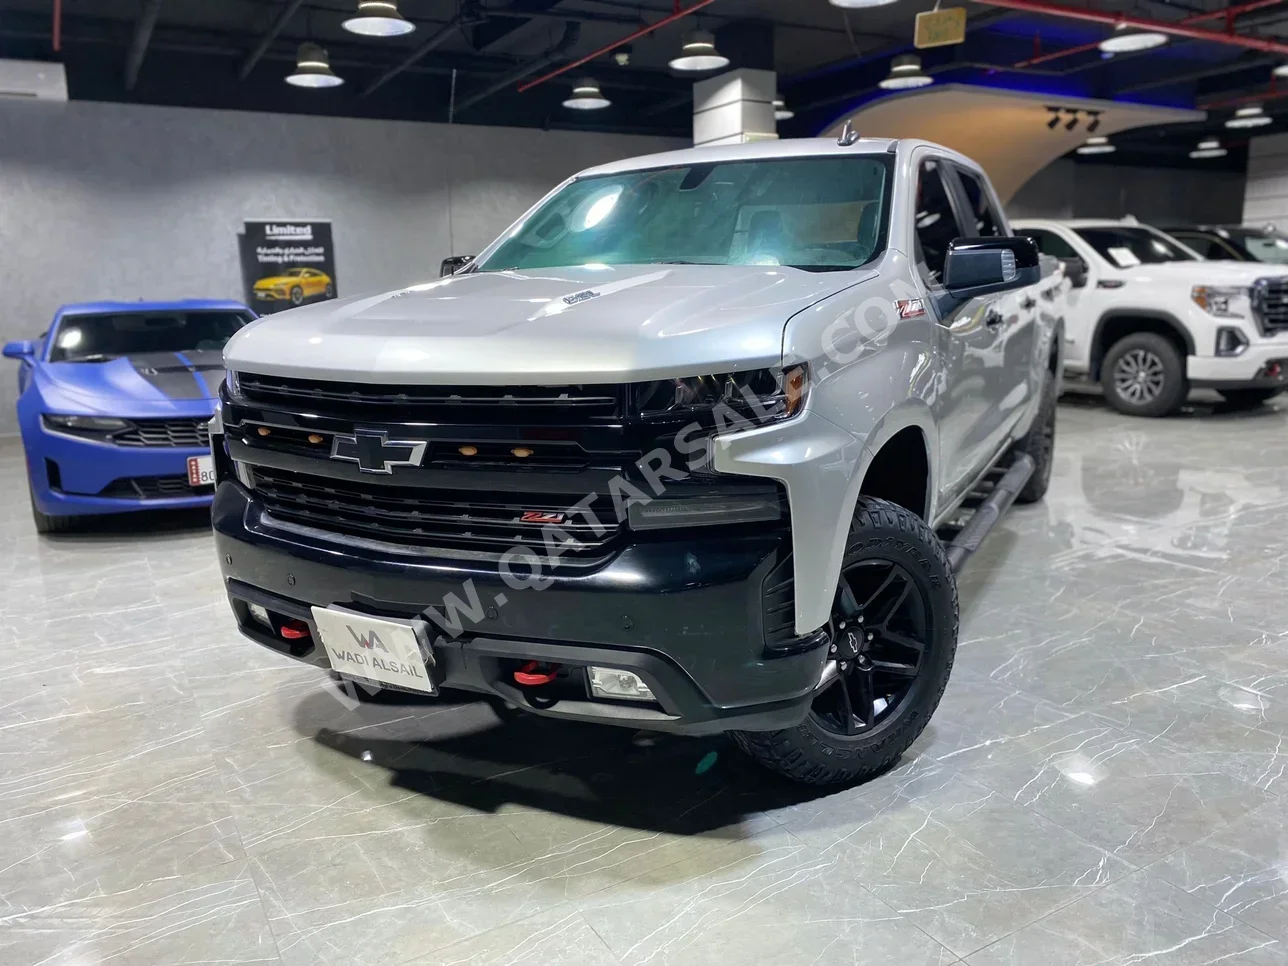 Chevrolet  Silverado  Trail Boss  2022  Automatic  25,000 Km  8 Cylinder  Four Wheel Drive (4WD)  Pick Up  Silver  With Warranty